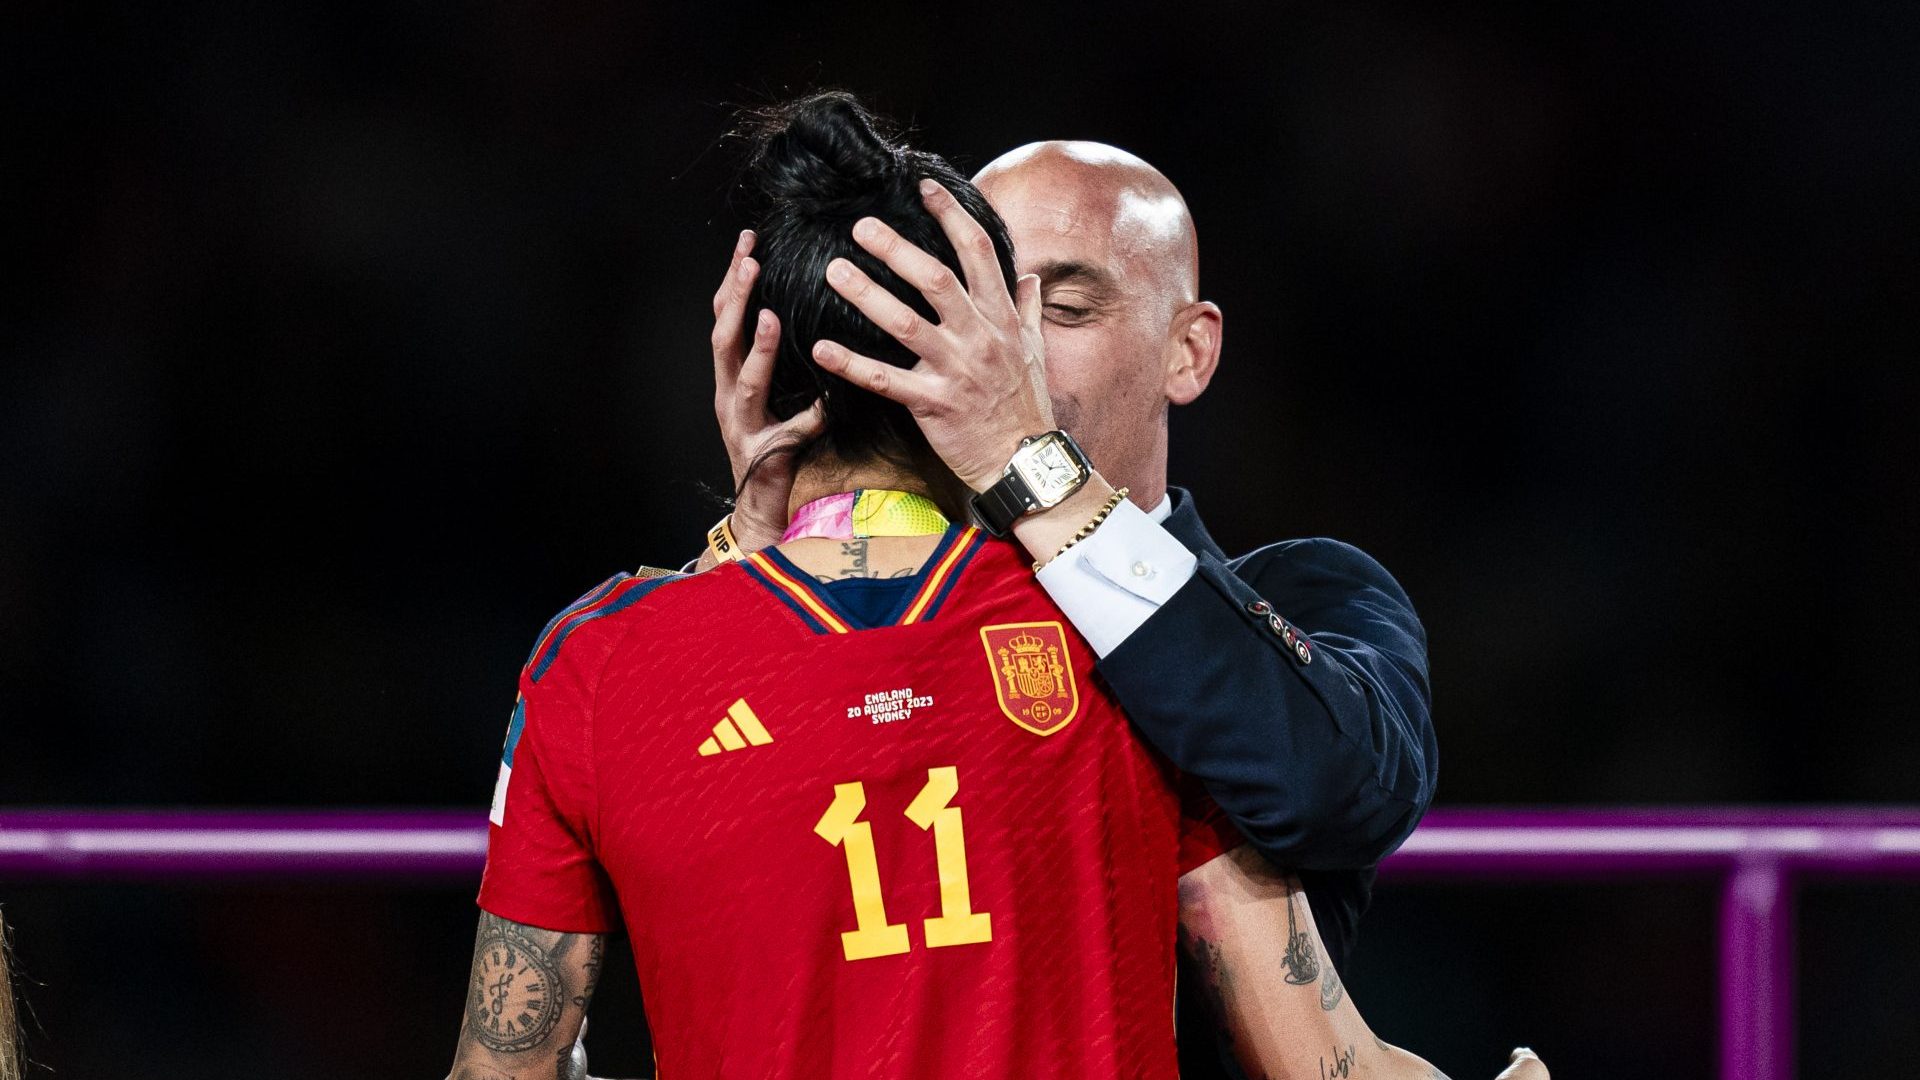 The president of the Royal Spanish Football Federation, Luis Rubiales, kisses Jennifer Hermoso during the medal ceremony of the Women’s World Cup final. Photo: Noemi Llamas/Eurasia Sport Images/Getty